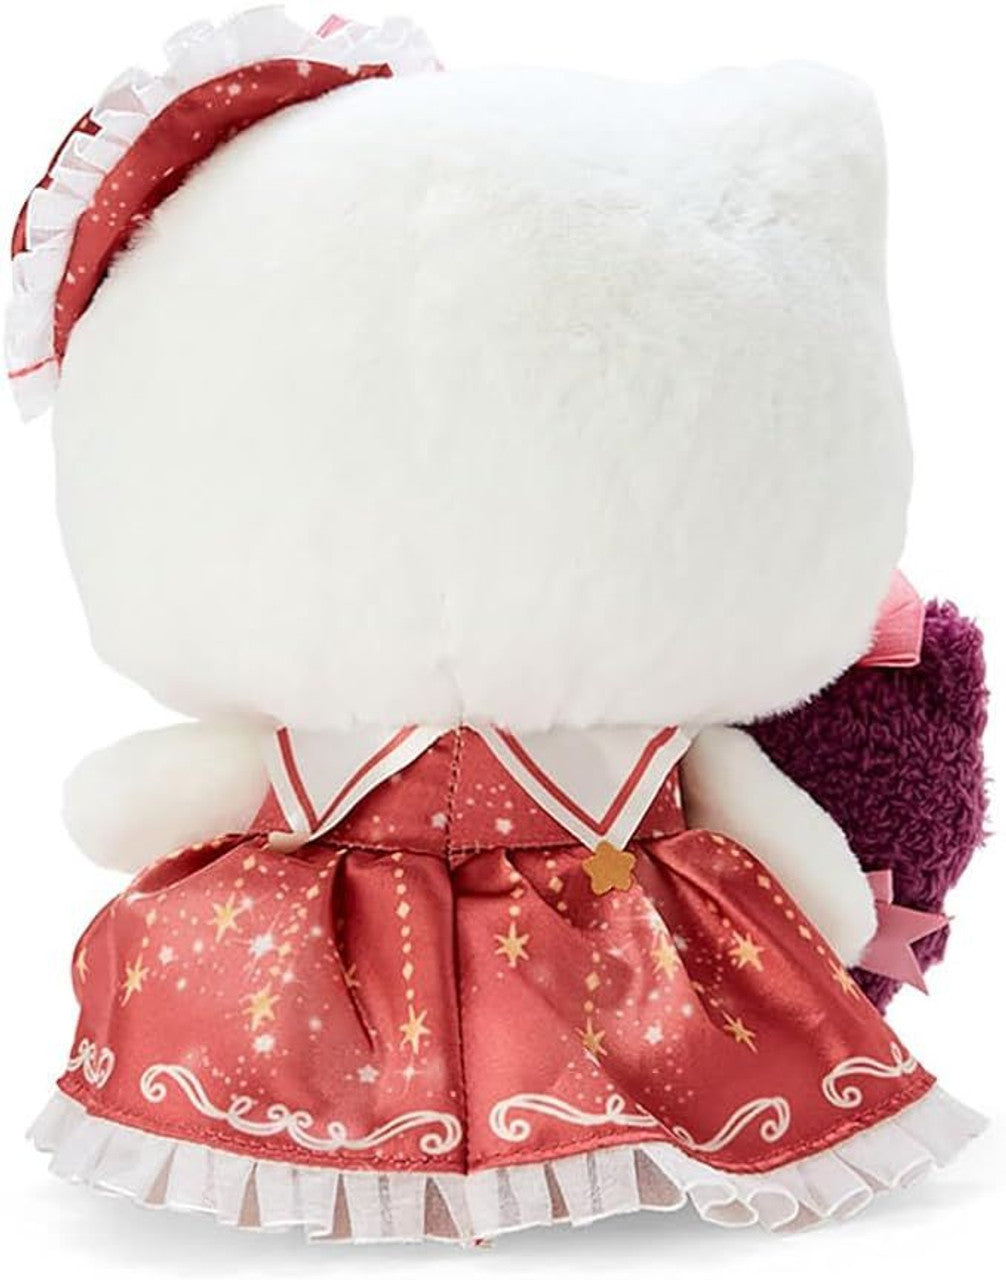 Plush - Sanrio Character Magical With Pet